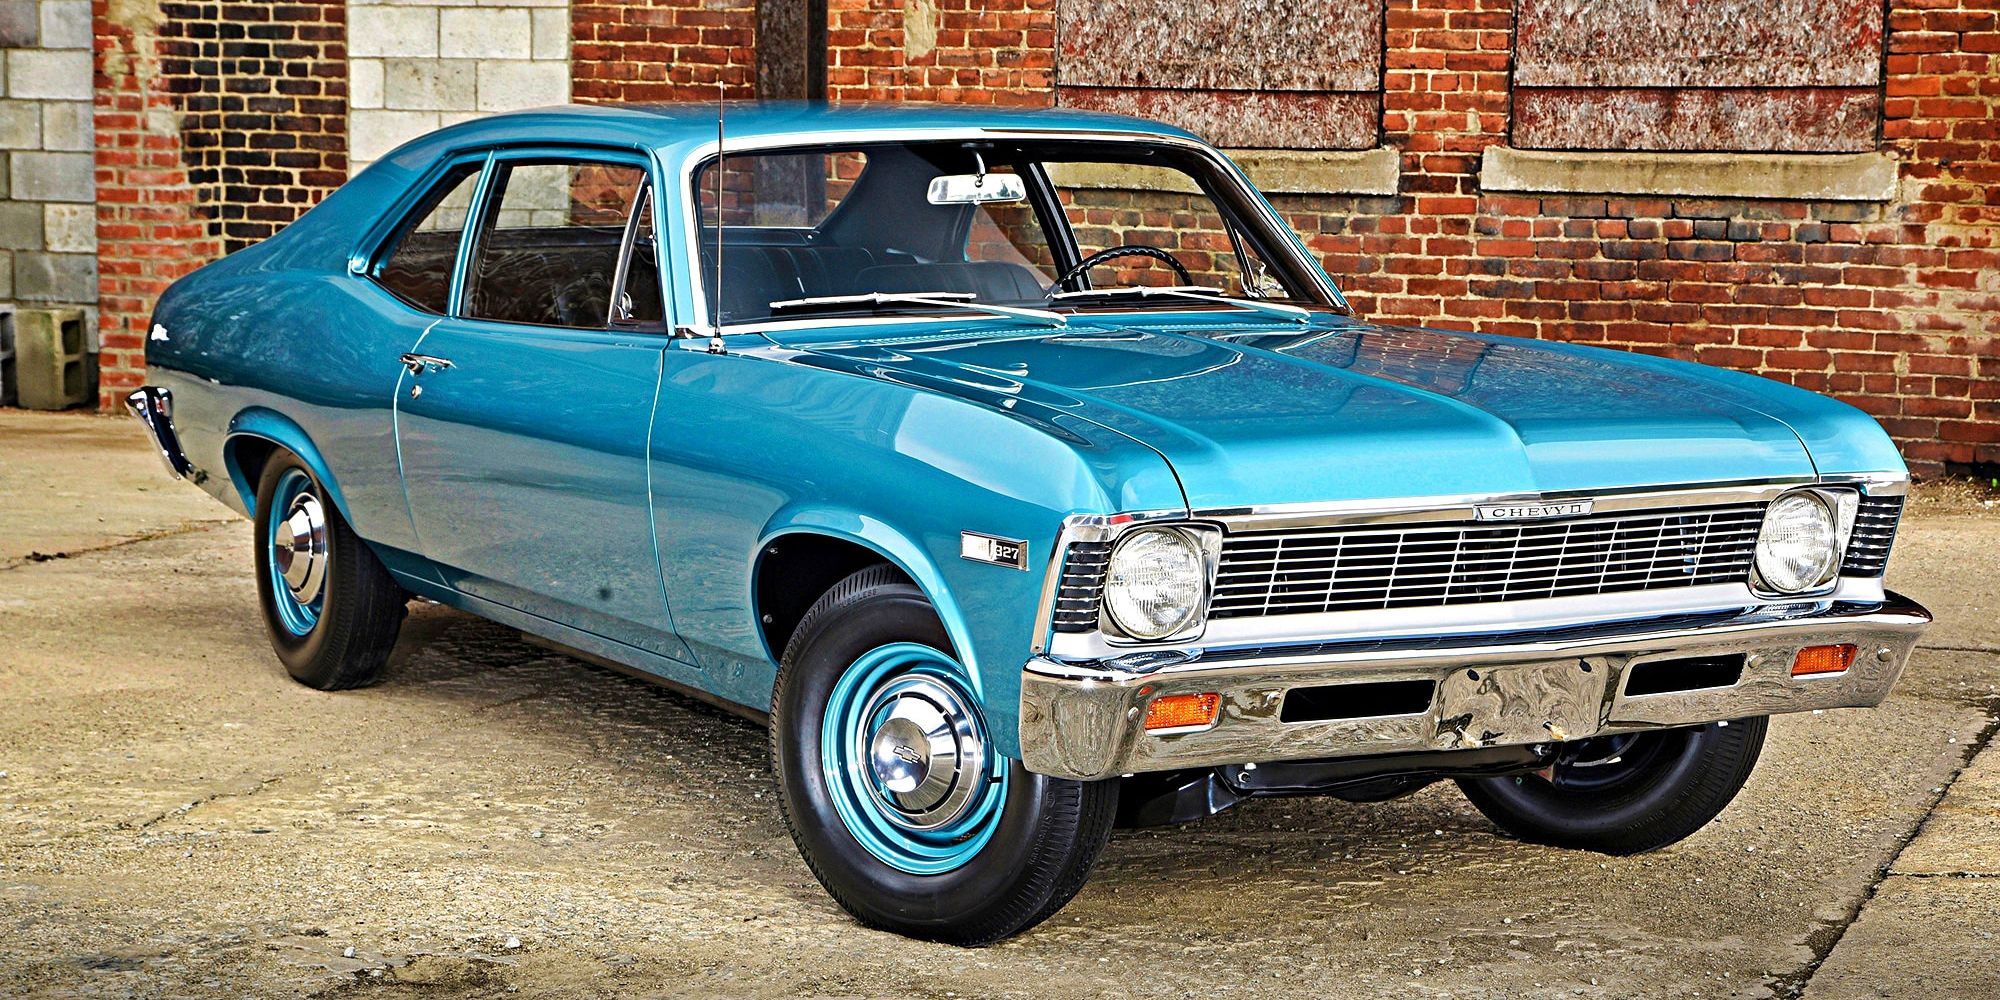 The front of a teal blue Nova